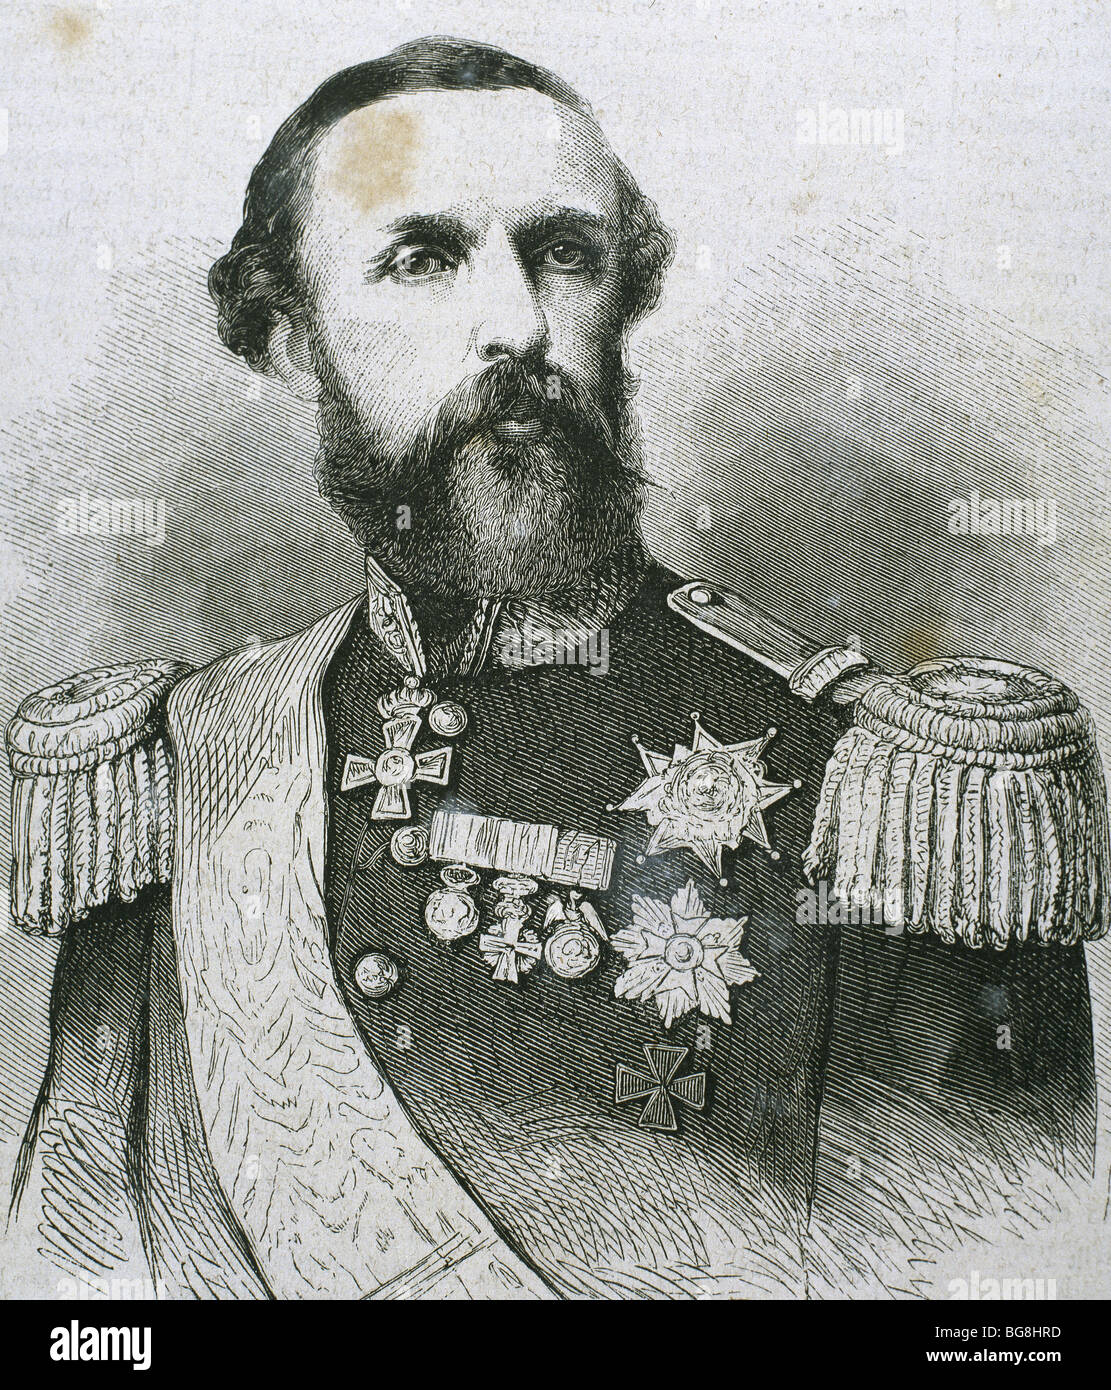 Oscar II (Stockholm 1829-Stockholm, 1907). King of Sweden (1872-1907) and Norway (1872-1905). Stock Photo